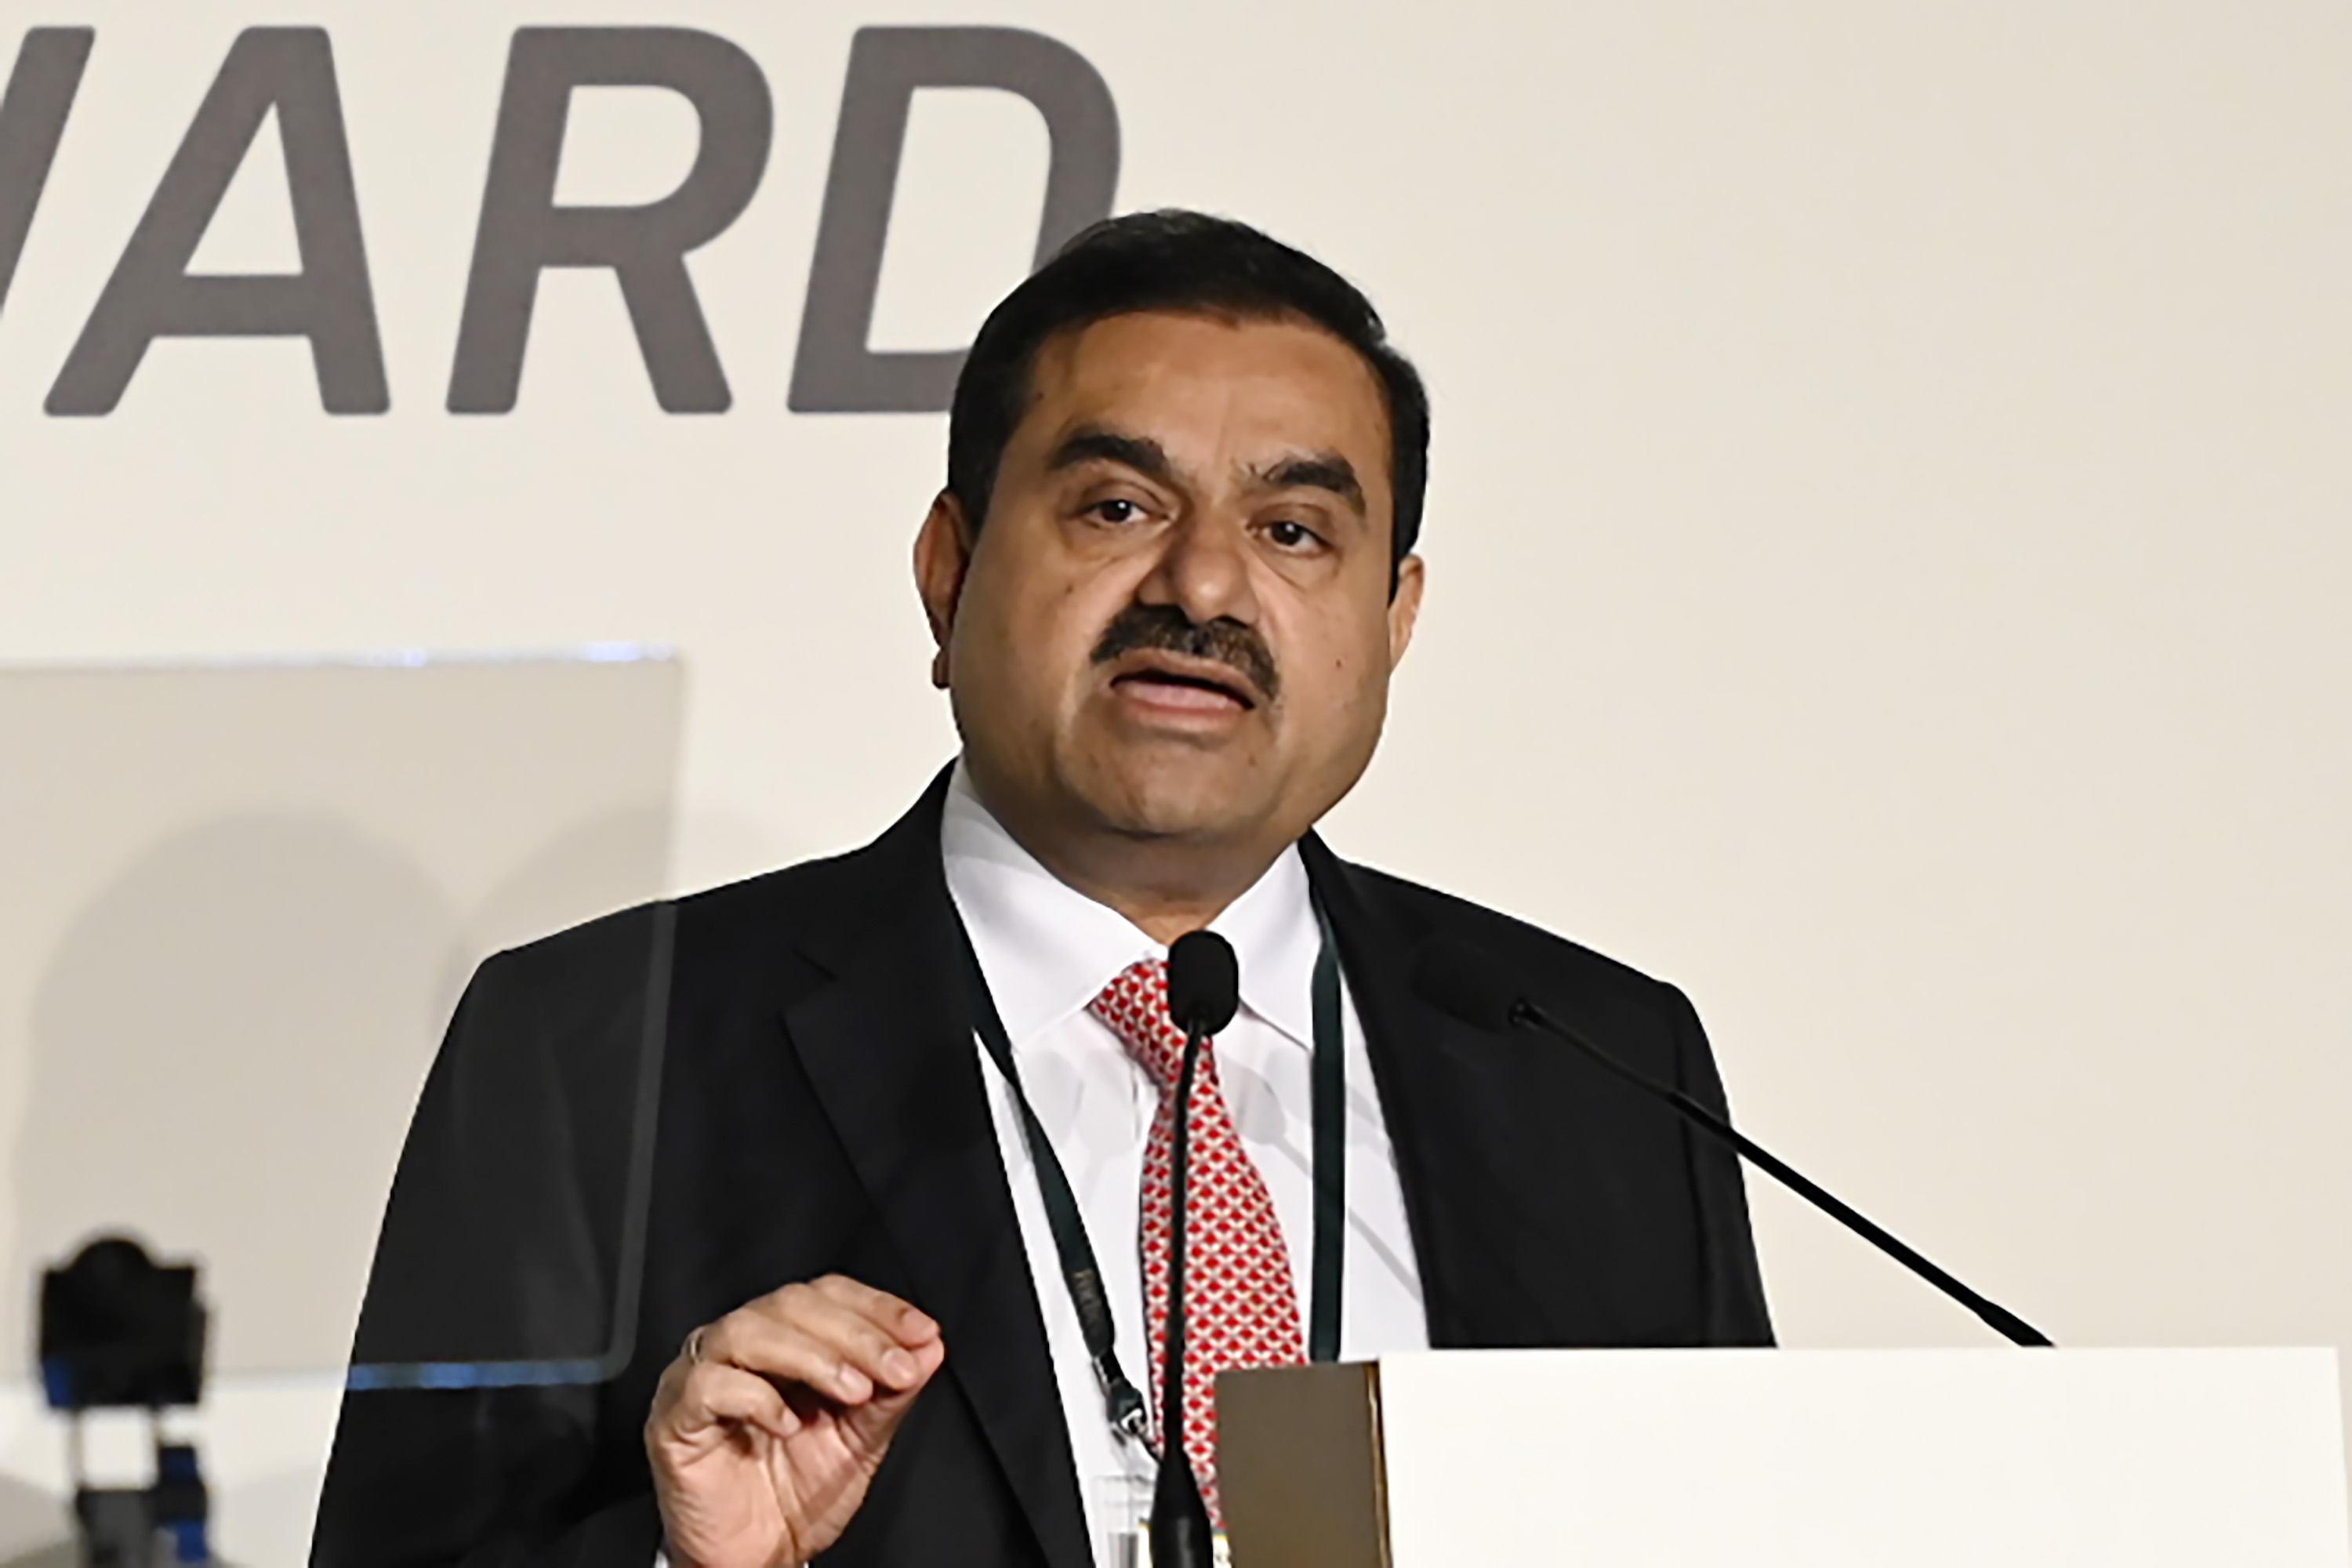 Adani Utility Shows Funding Urgency to Power India as Group Recovers From  Rout - Bloomberg